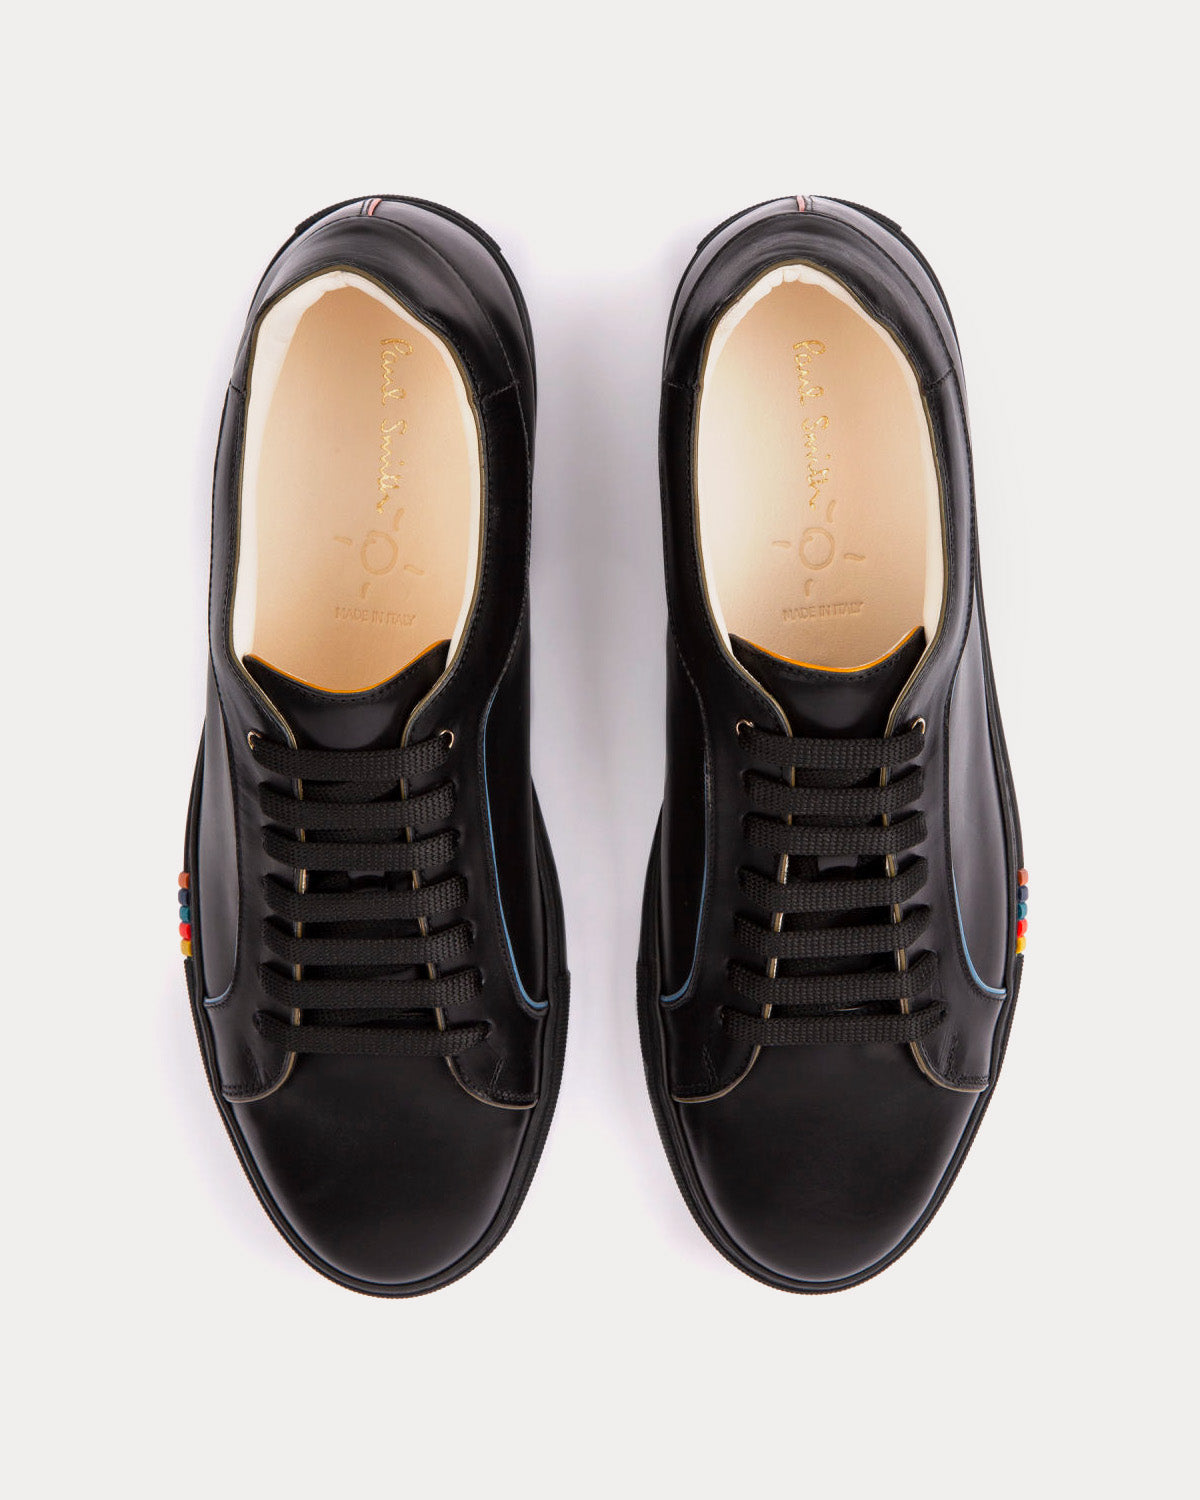 Paul Smith - Basso with Artist Stripe Trim Black Low Top Sneakers